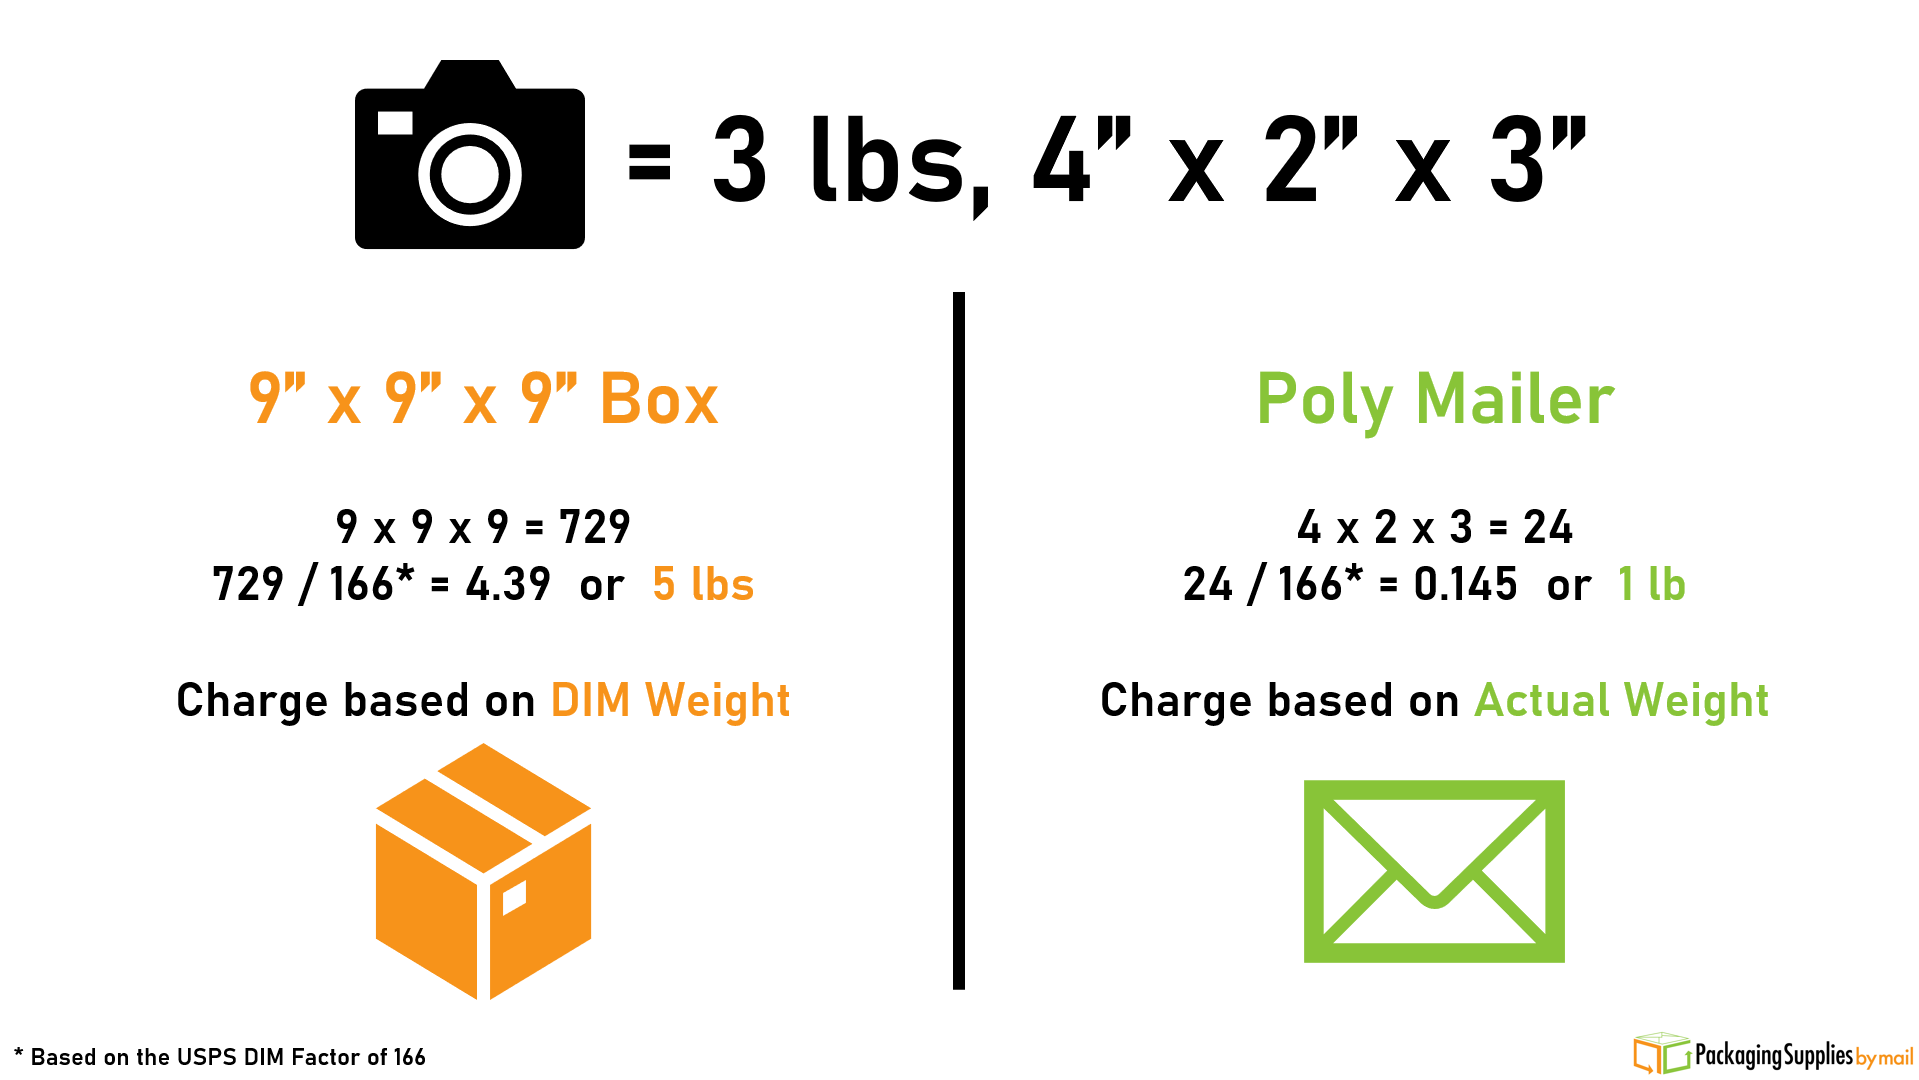 How packaging affects your DIM weight calculation.